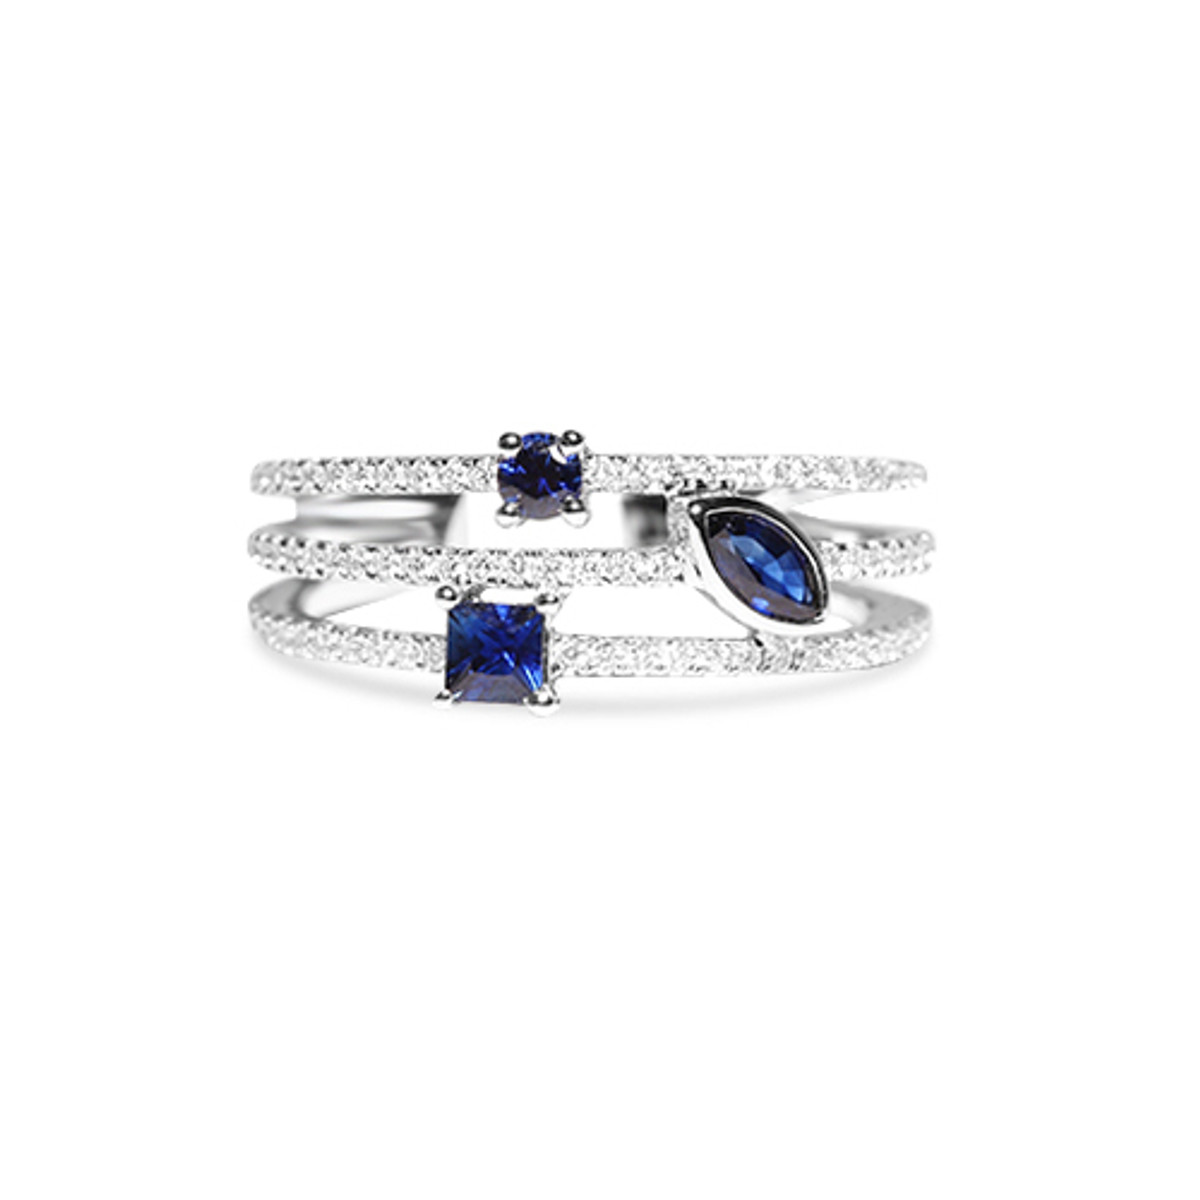 Hyde Park Collection 14K White Gold Diamond Sapphire 3 Row Ring-23491 Product Image